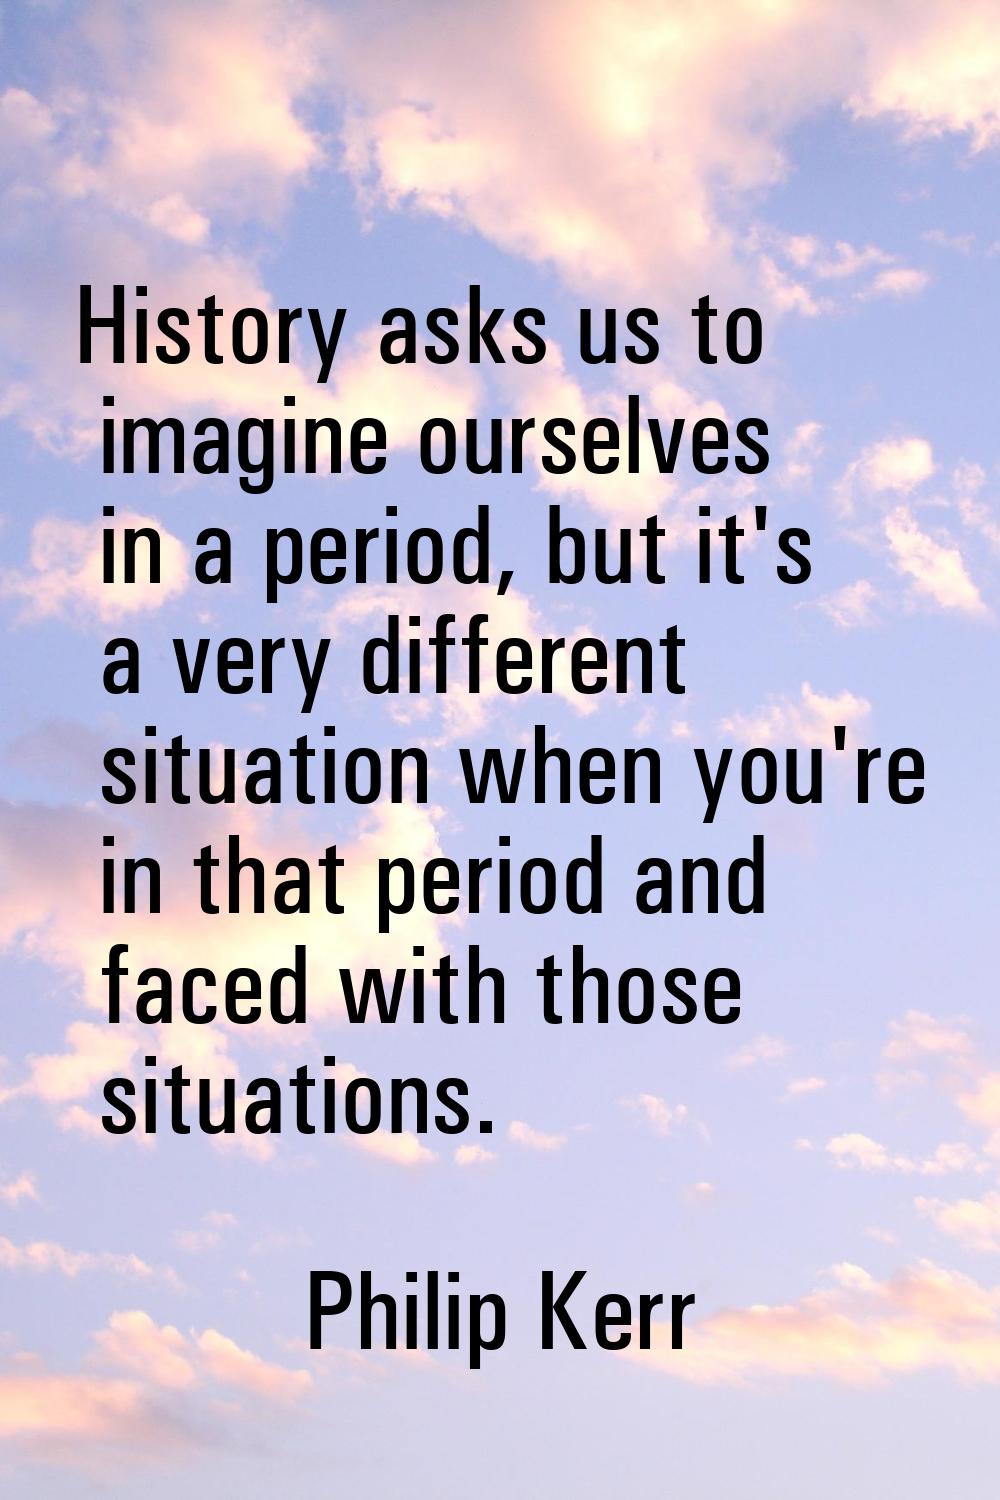 History asks us to imagine ourselves in a period, but it's a very different situation when you're i